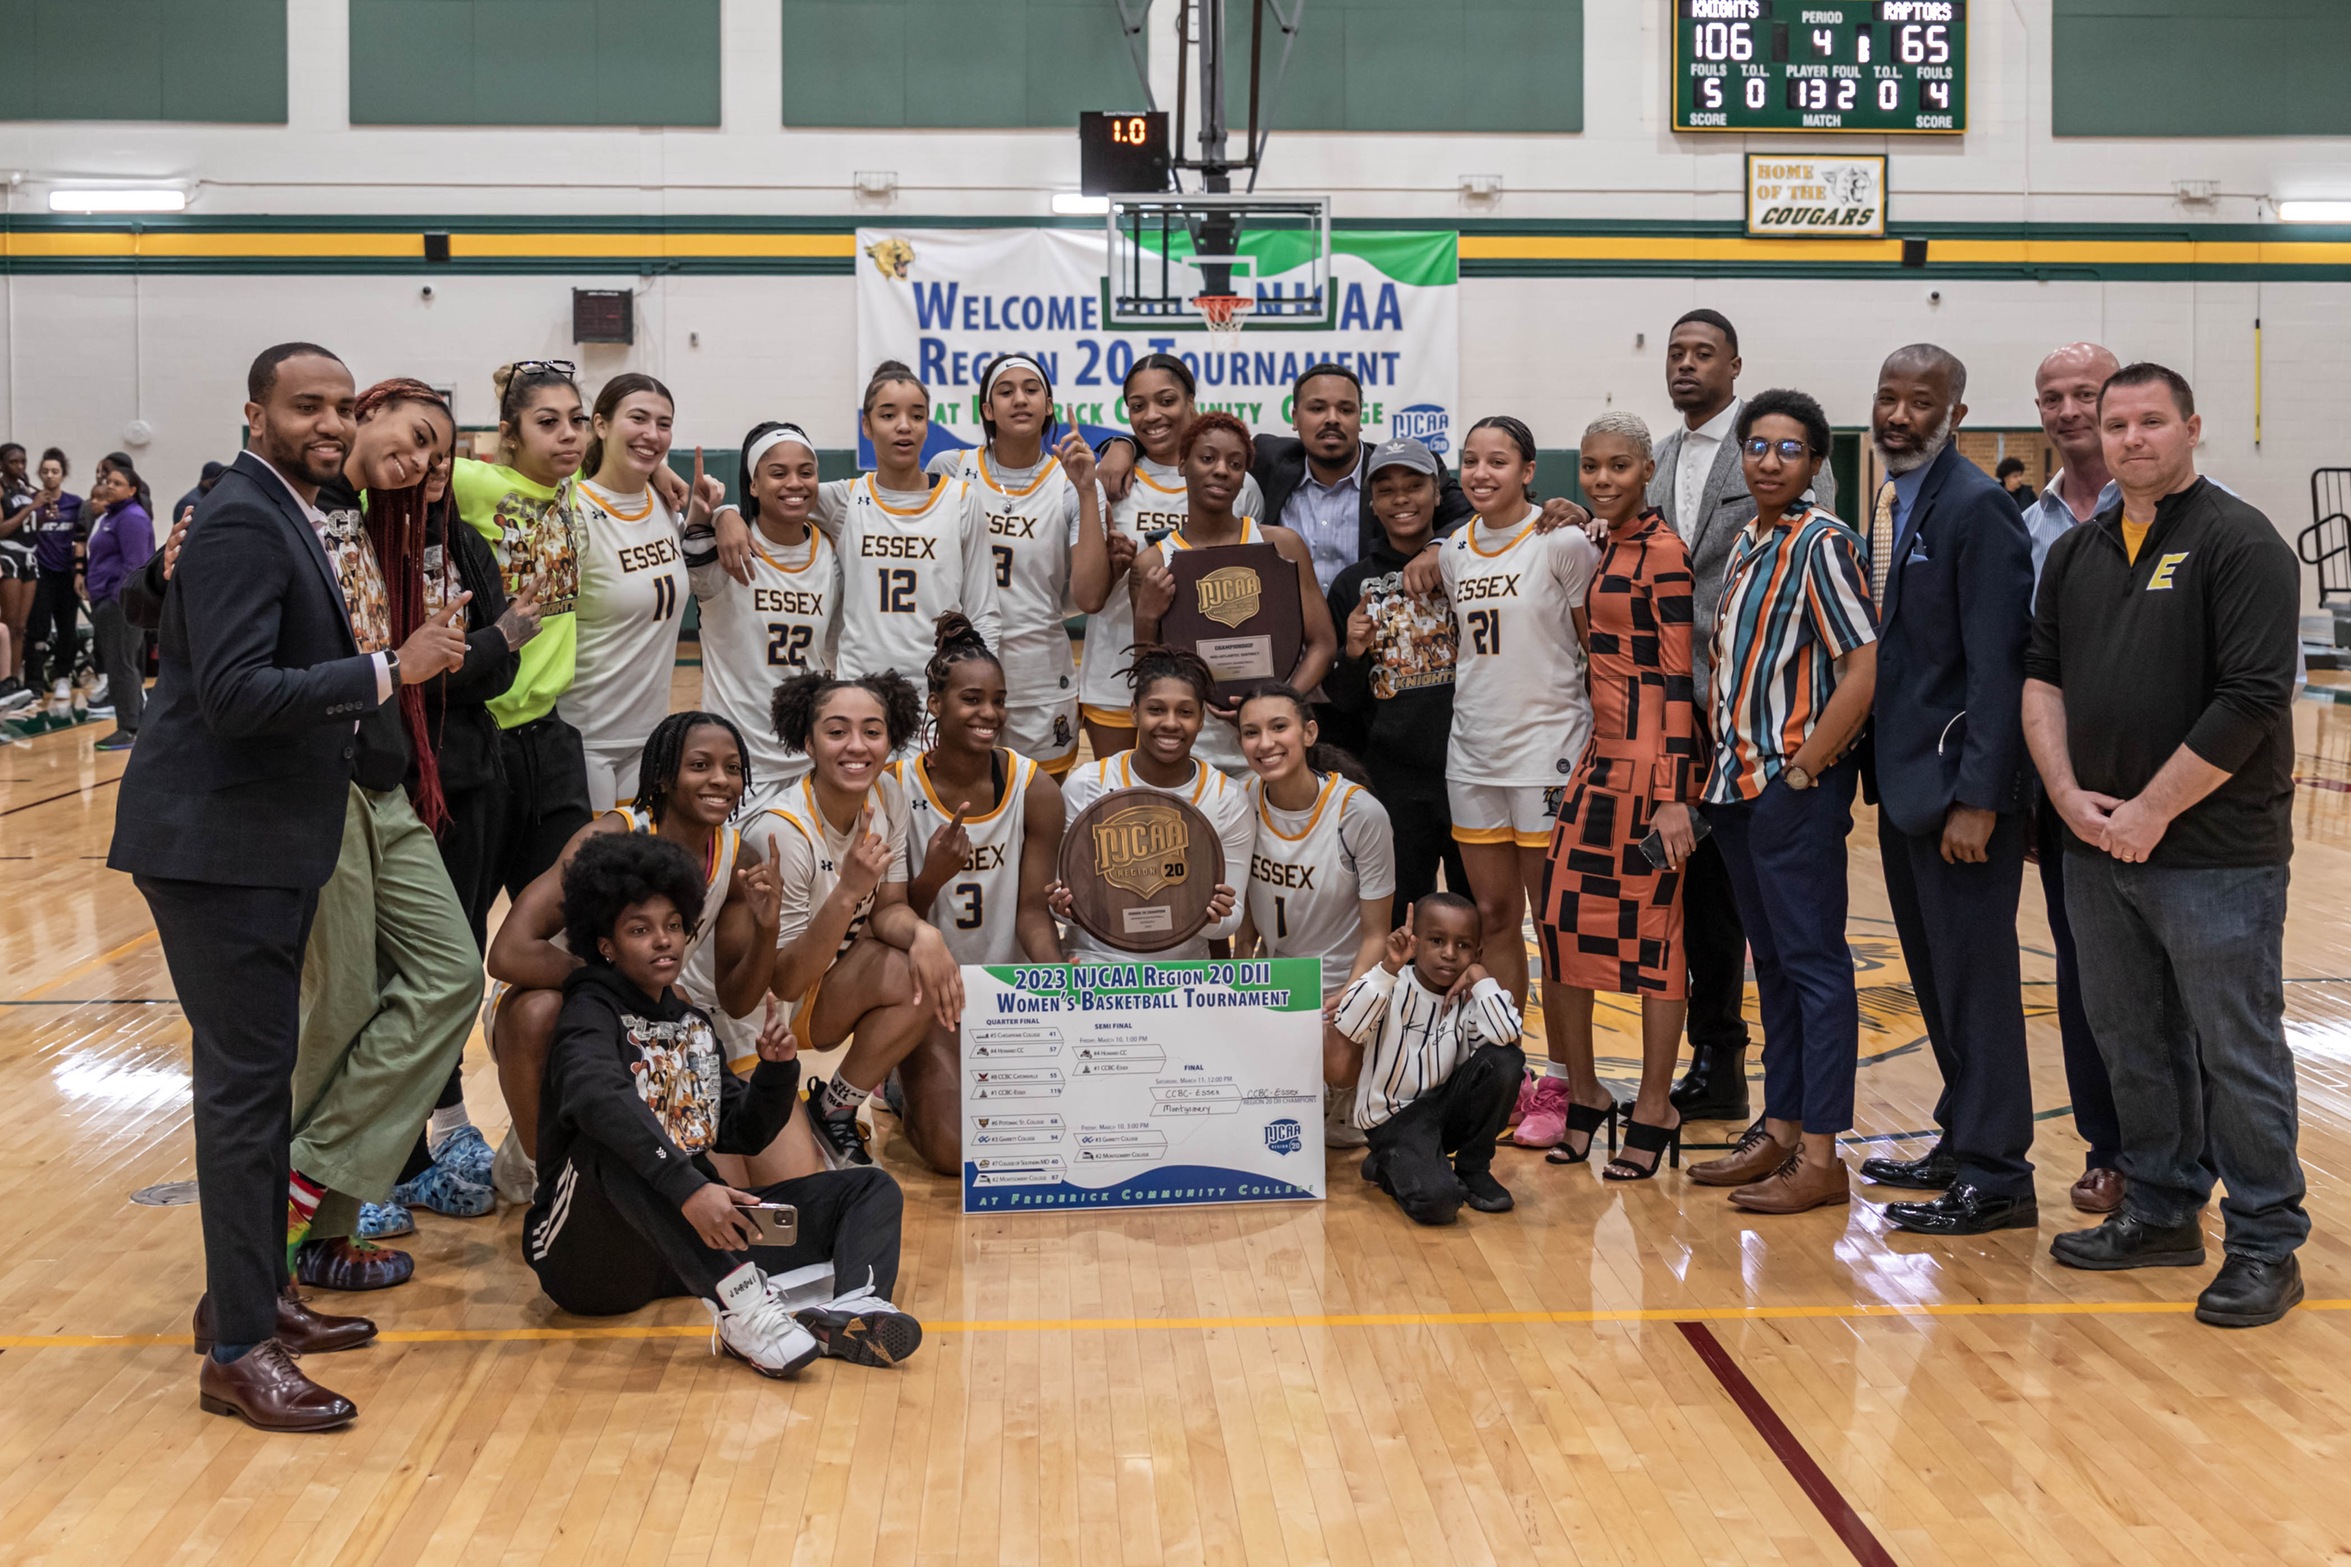 CCBC Essex Women Division II Region 20 and Mid-Atlantic District Hoops Champs